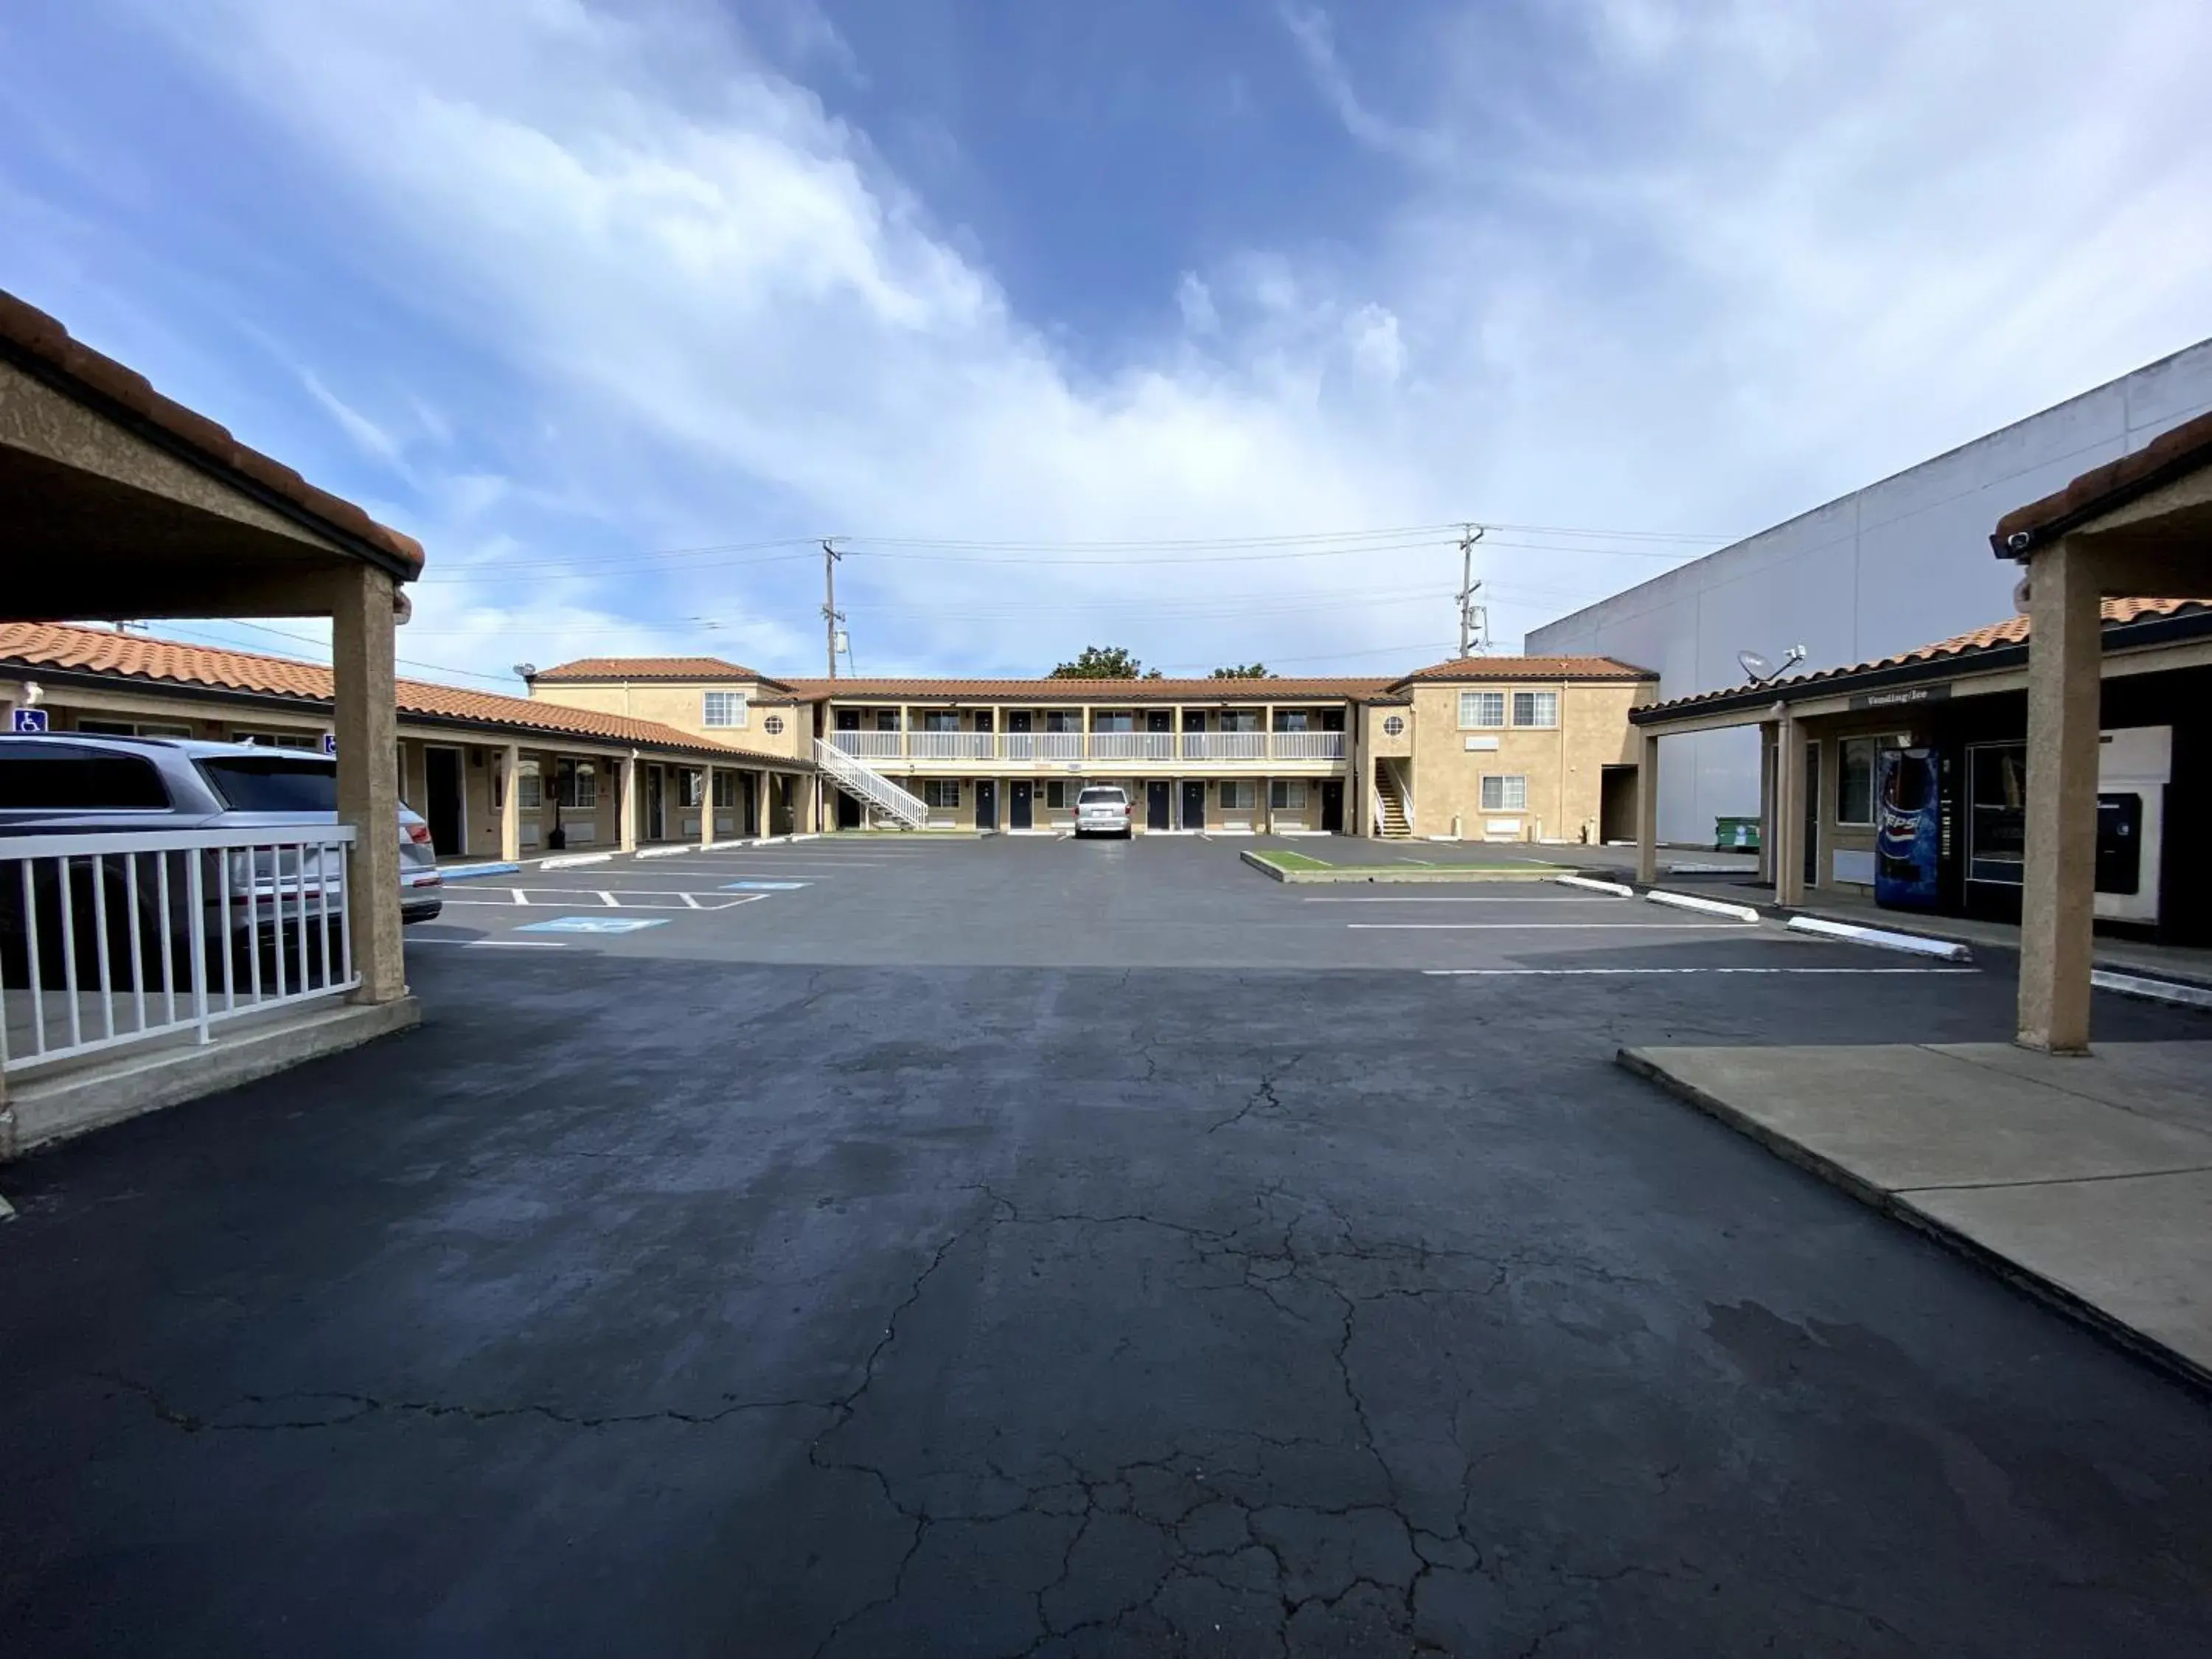 Property Building in Bridgepoint Inn Daly City